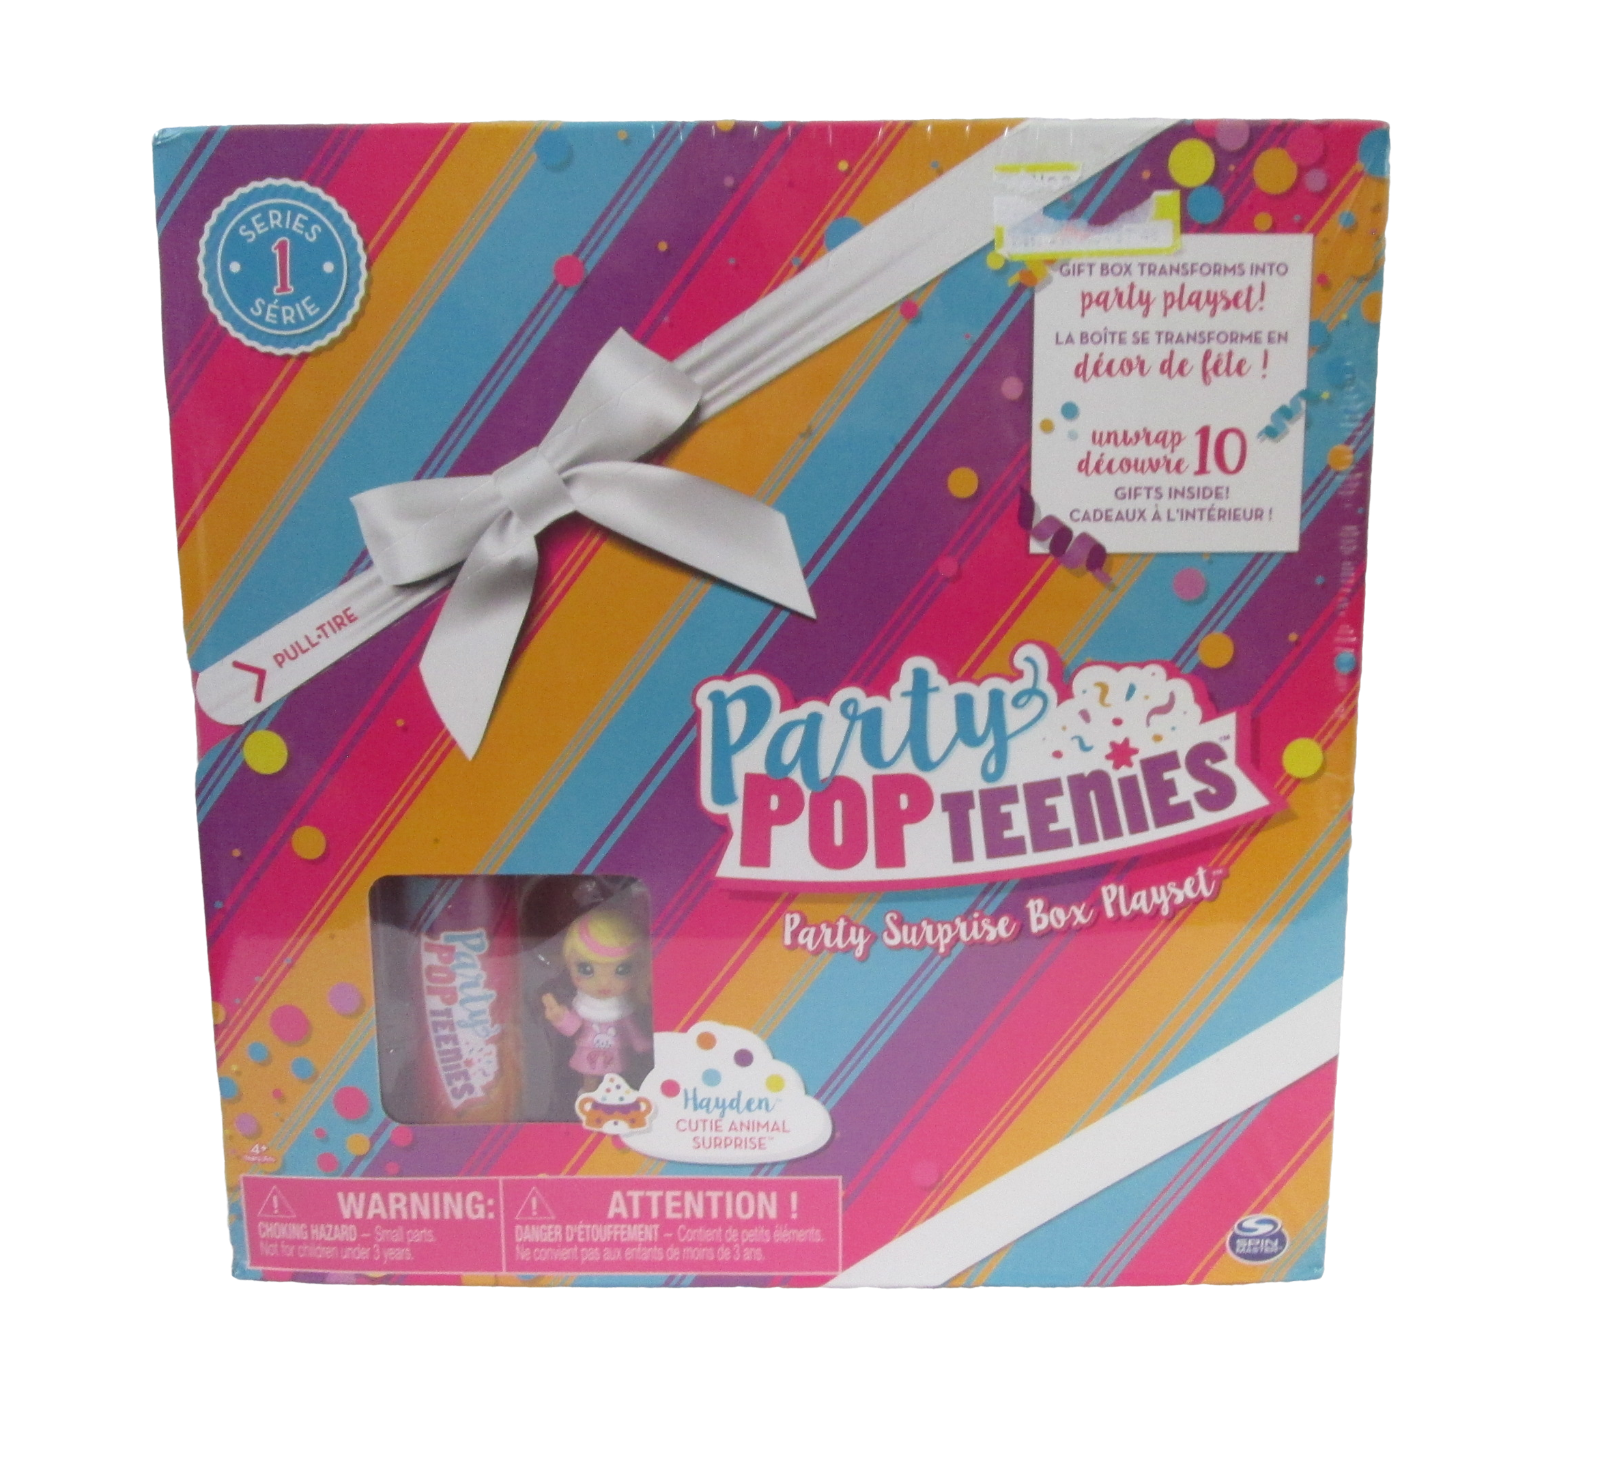 Party Pop Teenies Surprise Box Series 1 10 Gifts Playset Spin Master Sealed - $12.85